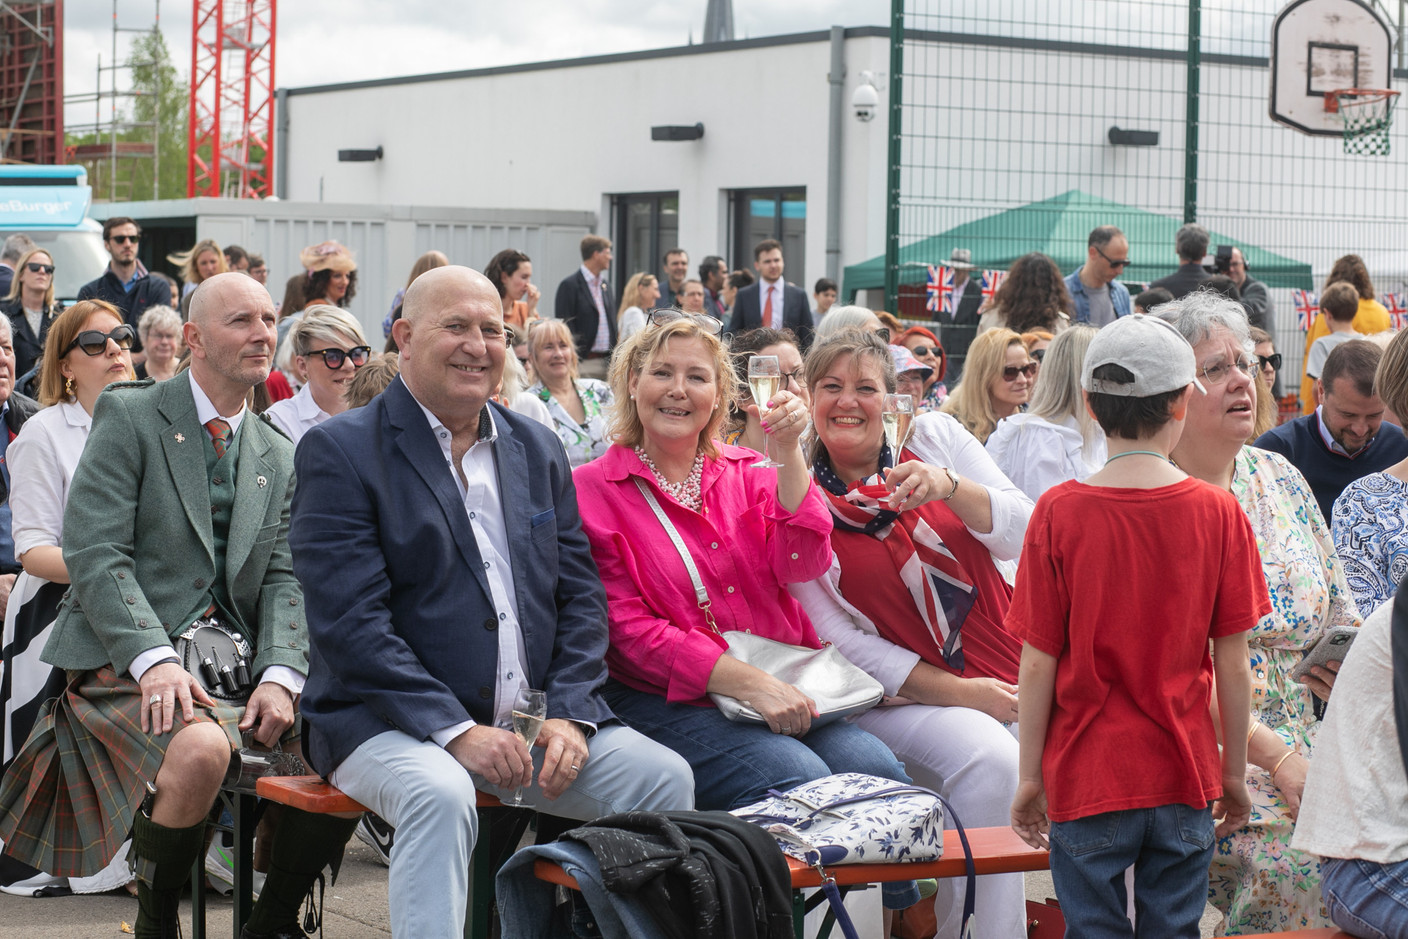 People attending an event at St George’s International School in Luxembourg on 6 May 2023 to celebrate the coronation of King Charles III and Queen Camilla. Photo: Matic Zorman / Maison Moderne